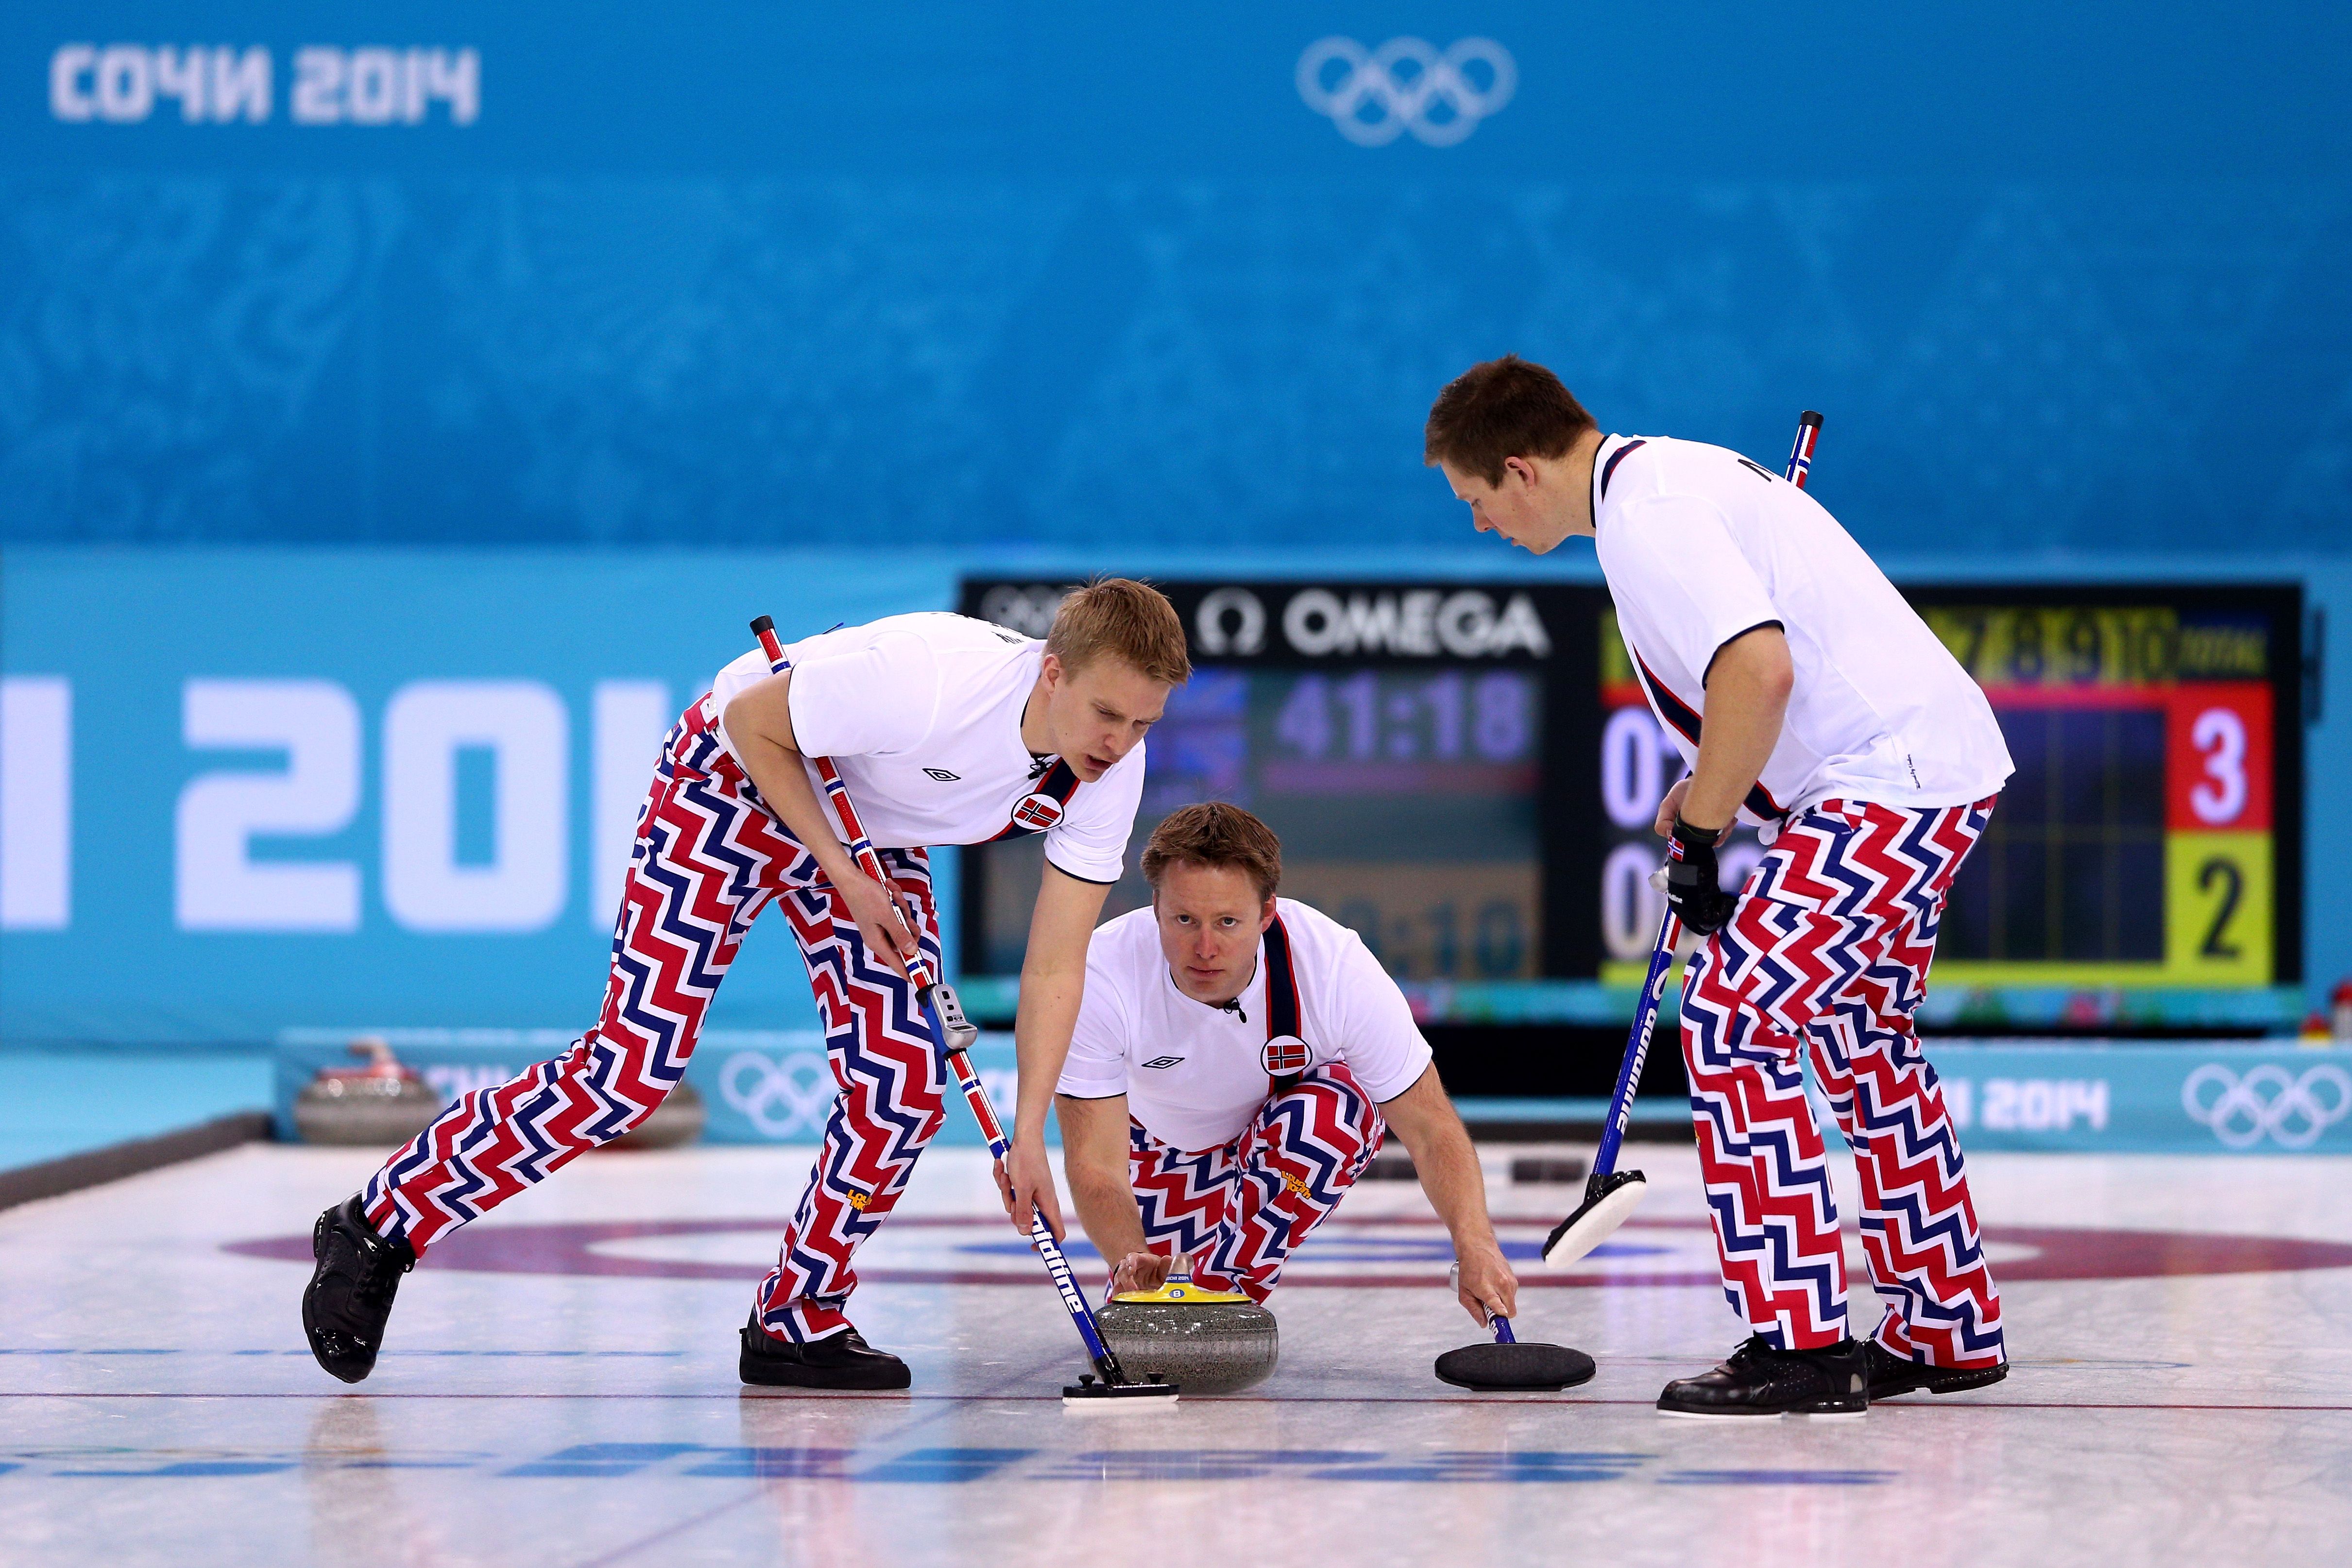 Norway's crazy curling pants tapped for third Olympics after close